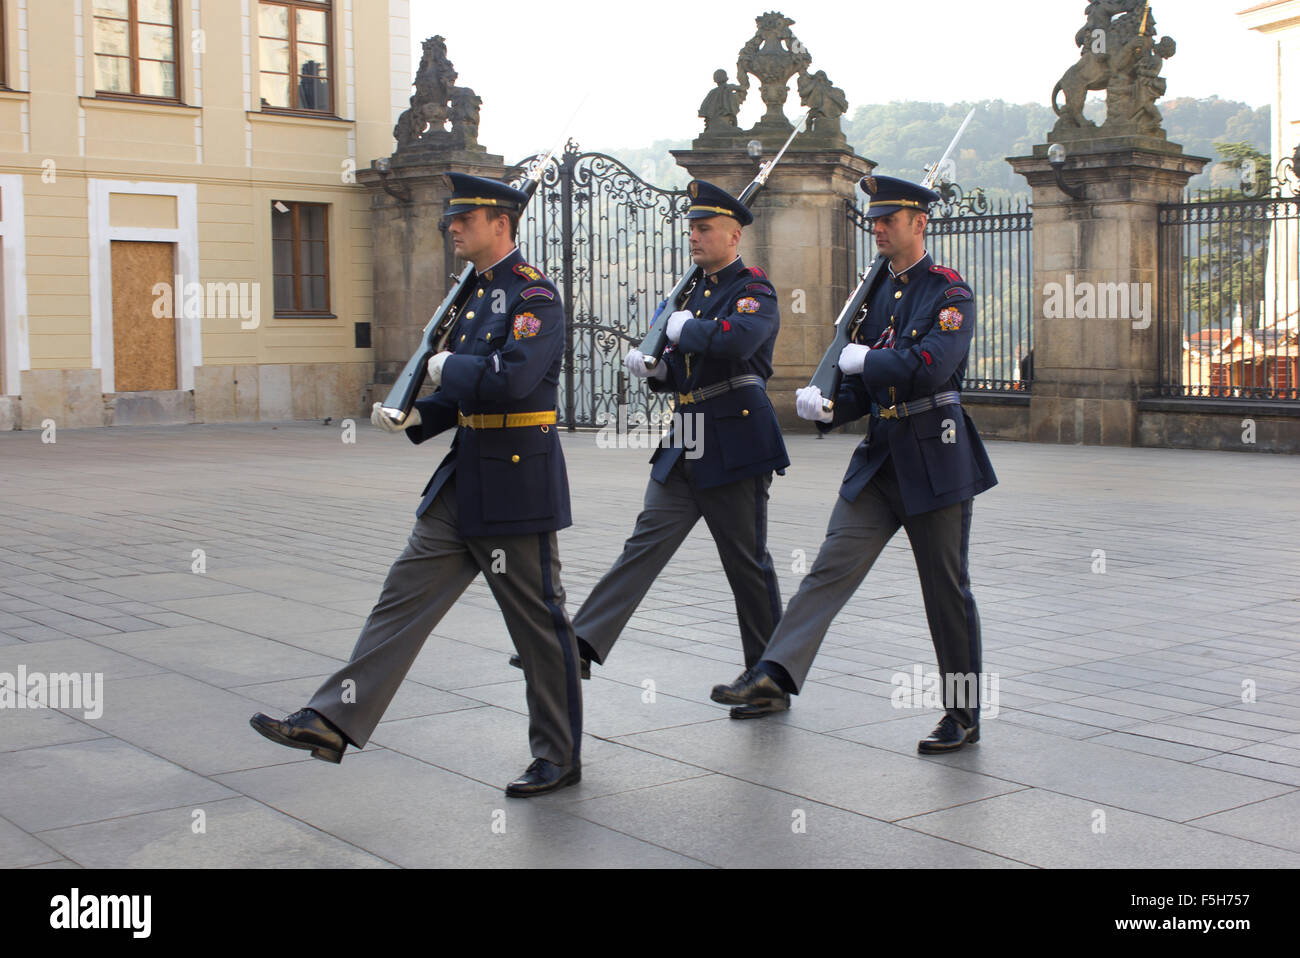 Prague military guards marching in the courtyard of Prague Palace. Stock Photo